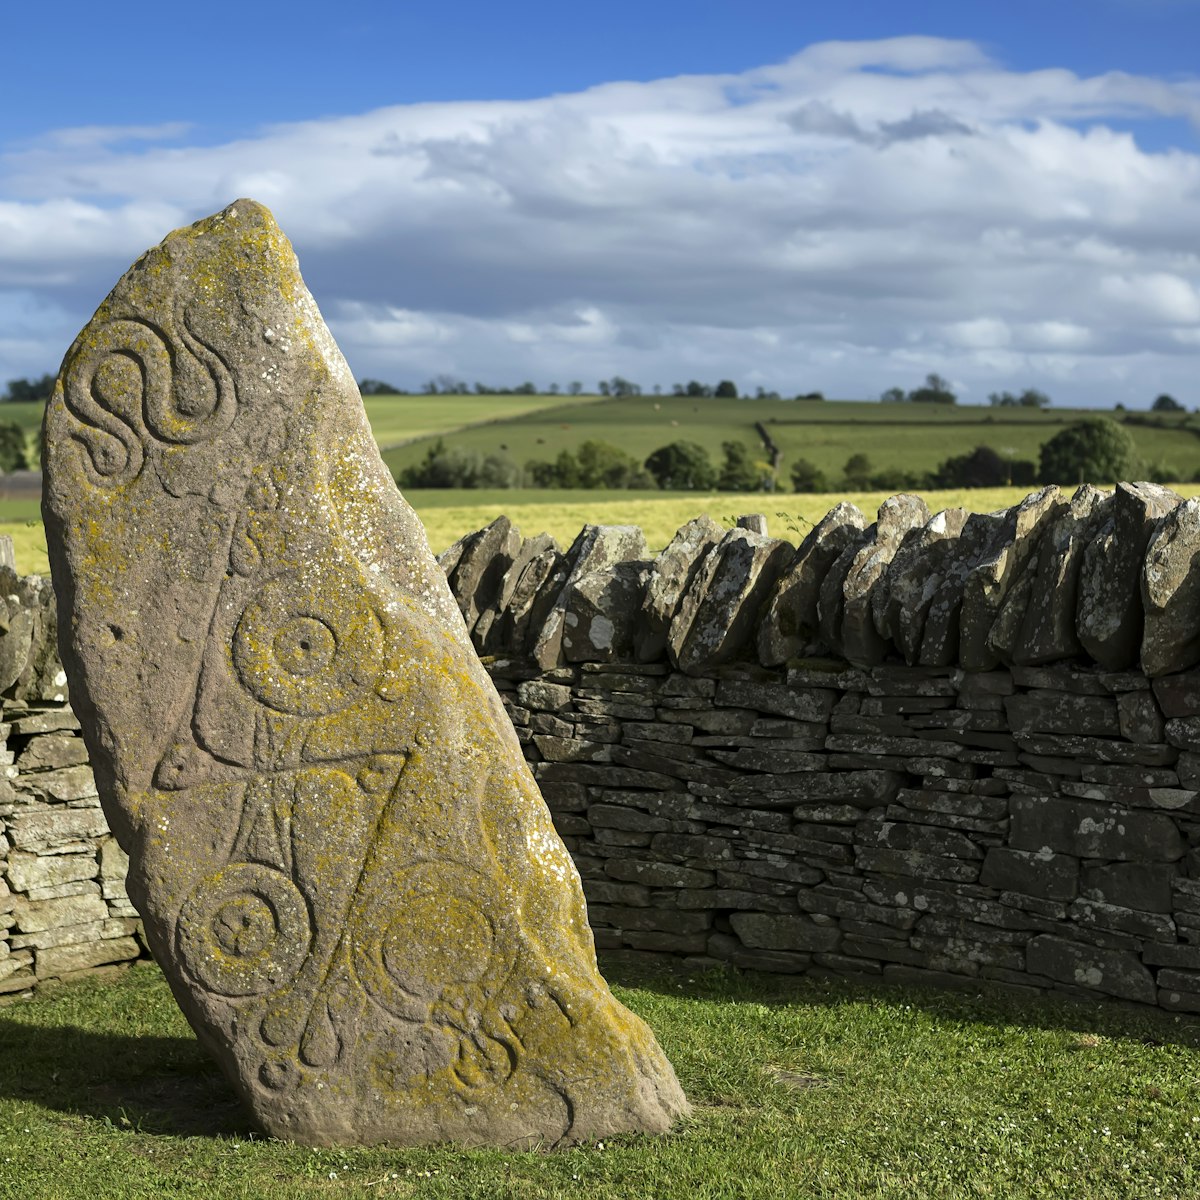 Aberlemno Pictish Stone in Scotland
1124293226
aberlemno, ancient, angus, archeology, art, britain, british, building, carved, celtic, church, culture, design, detail, exterior, heritage, historic, history, incised, landmark, landscape, medieval, monument, mystic, old, outdoor, pattern, pict, pictish, pictish stone, religion, roadside cross, rock, ruin, sandstone, scotland, scottish, sculpture, sky, standing, statue, stone, surface, symbol, texture, tourism, traditional, travel, uk, weathered